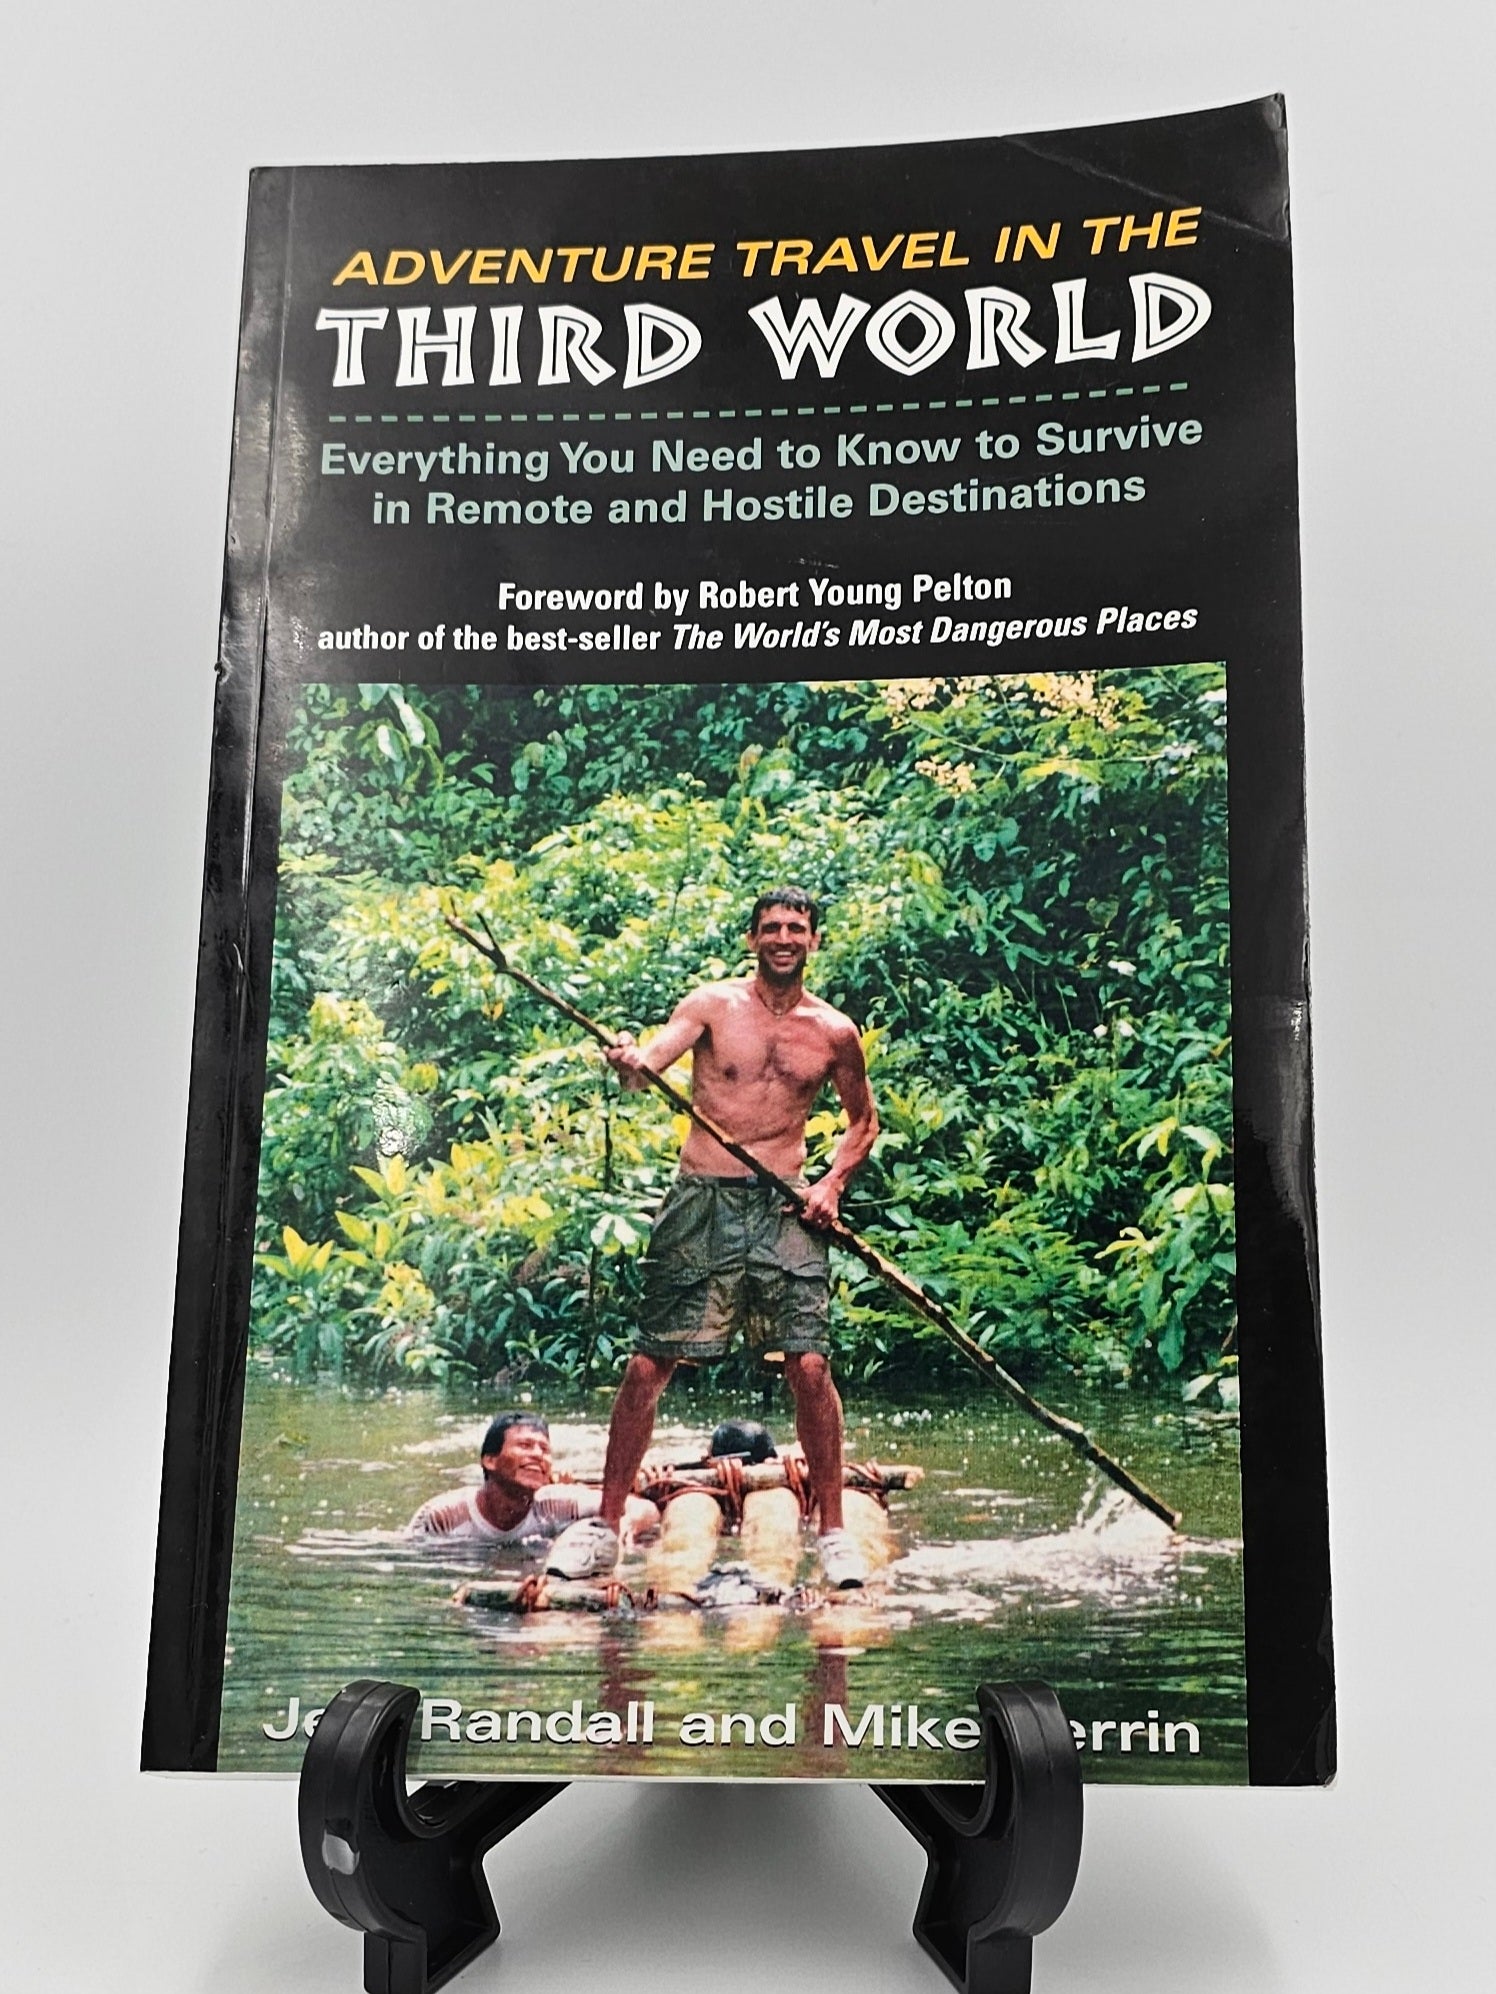 Adventure Travel In The Third World: Everything You Need To Know To Survive in Remote and Hostile Destinations [Book]